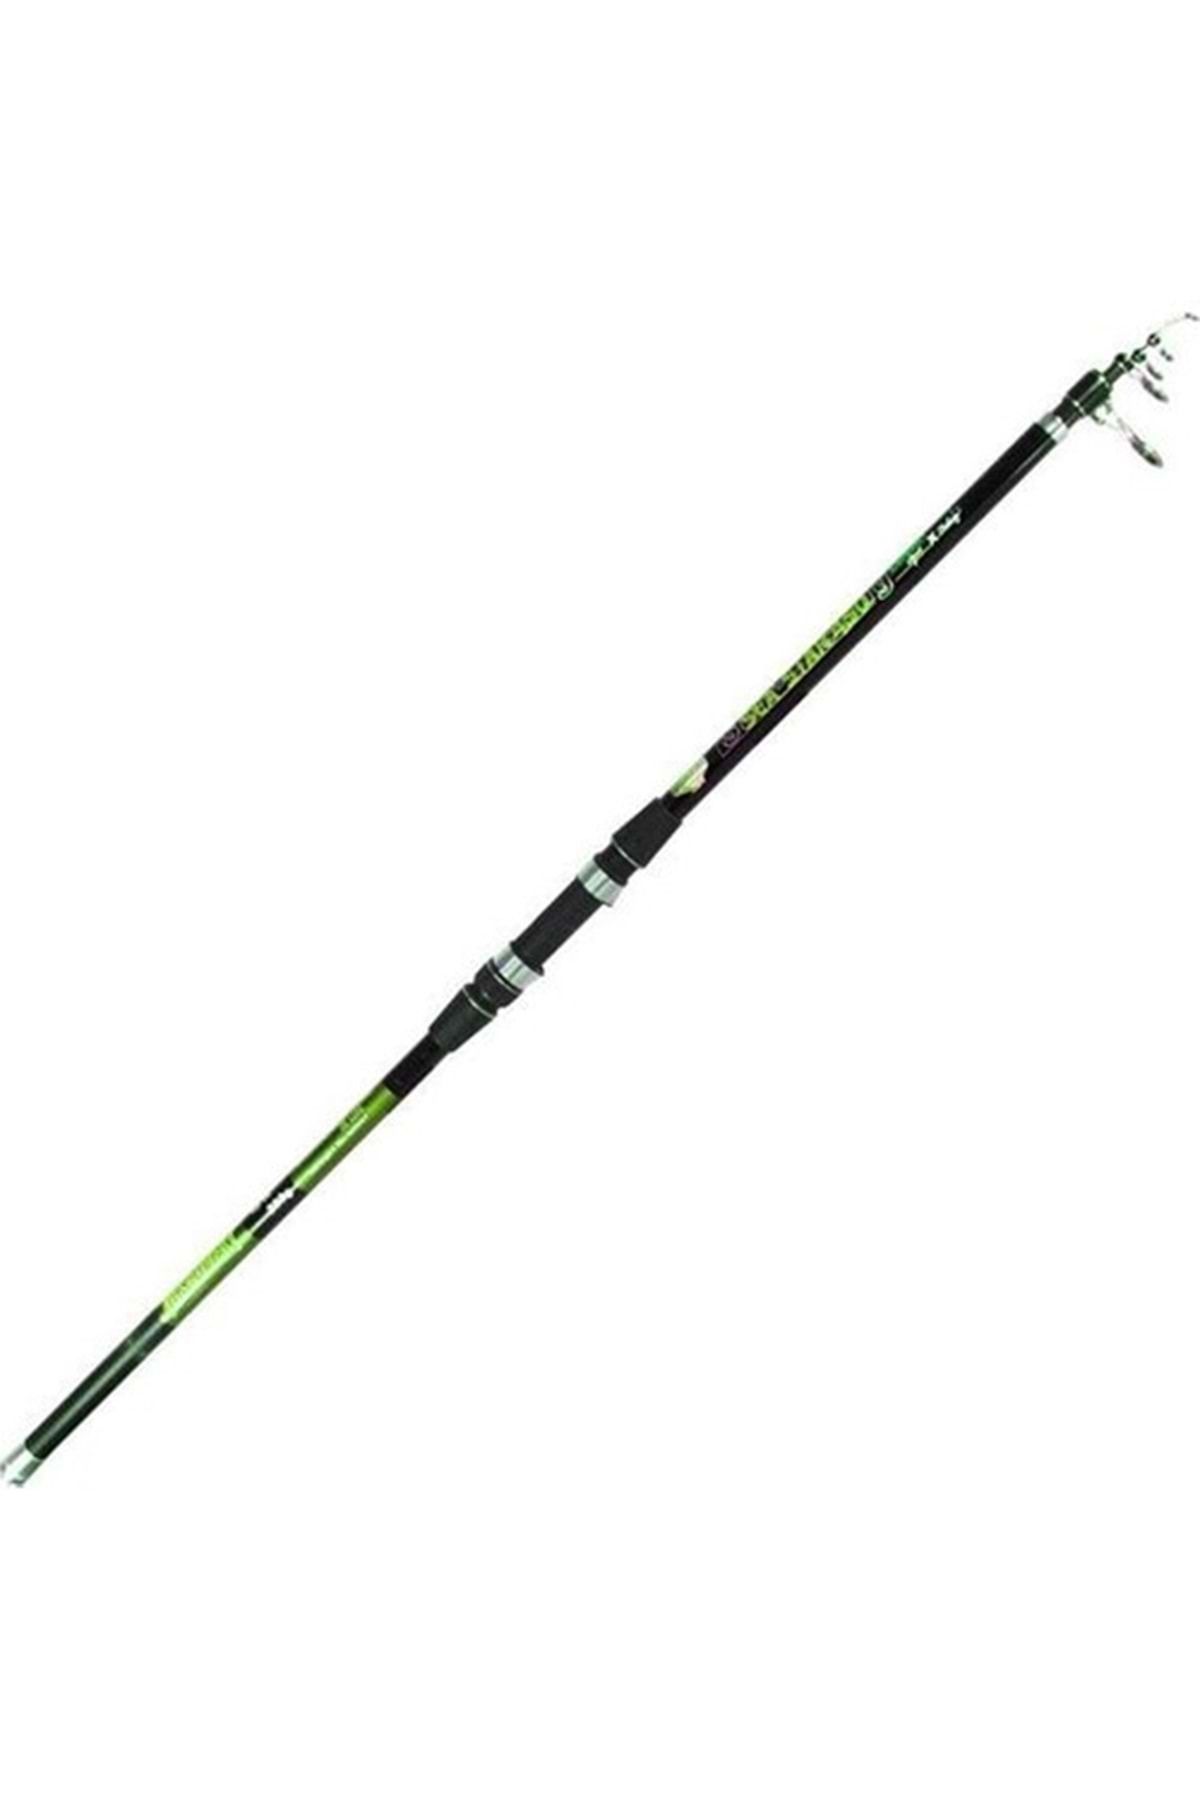 Discovery Sea Star 390cm Green 100-200gr 4 450 1ad.